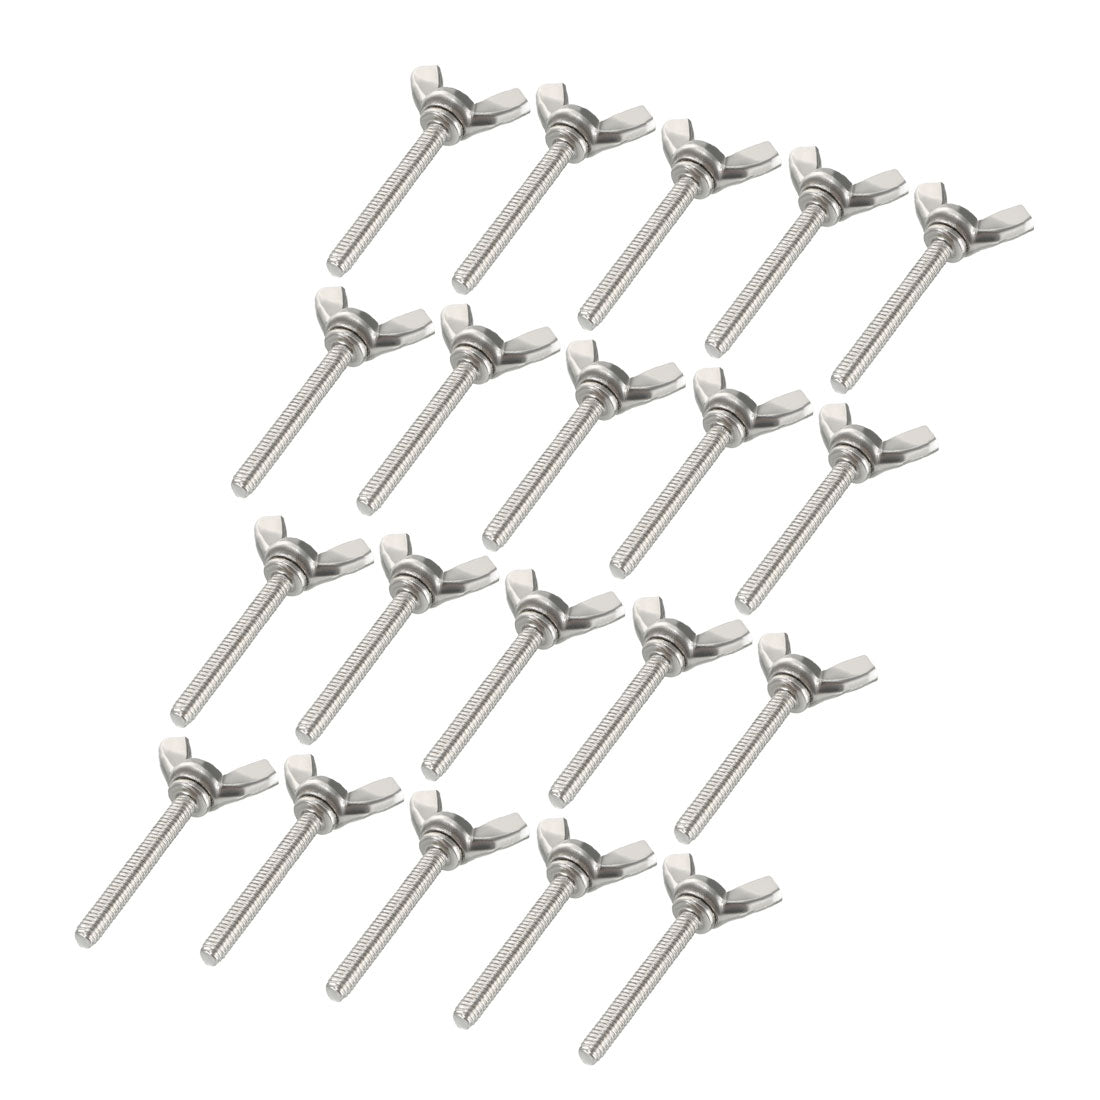 uxcell Uxcell Wingbolt Butterfly Wing Thumb Hand Screws Bolts M4x30mm 0.7mm Pitch Carbon Steel 20pcs